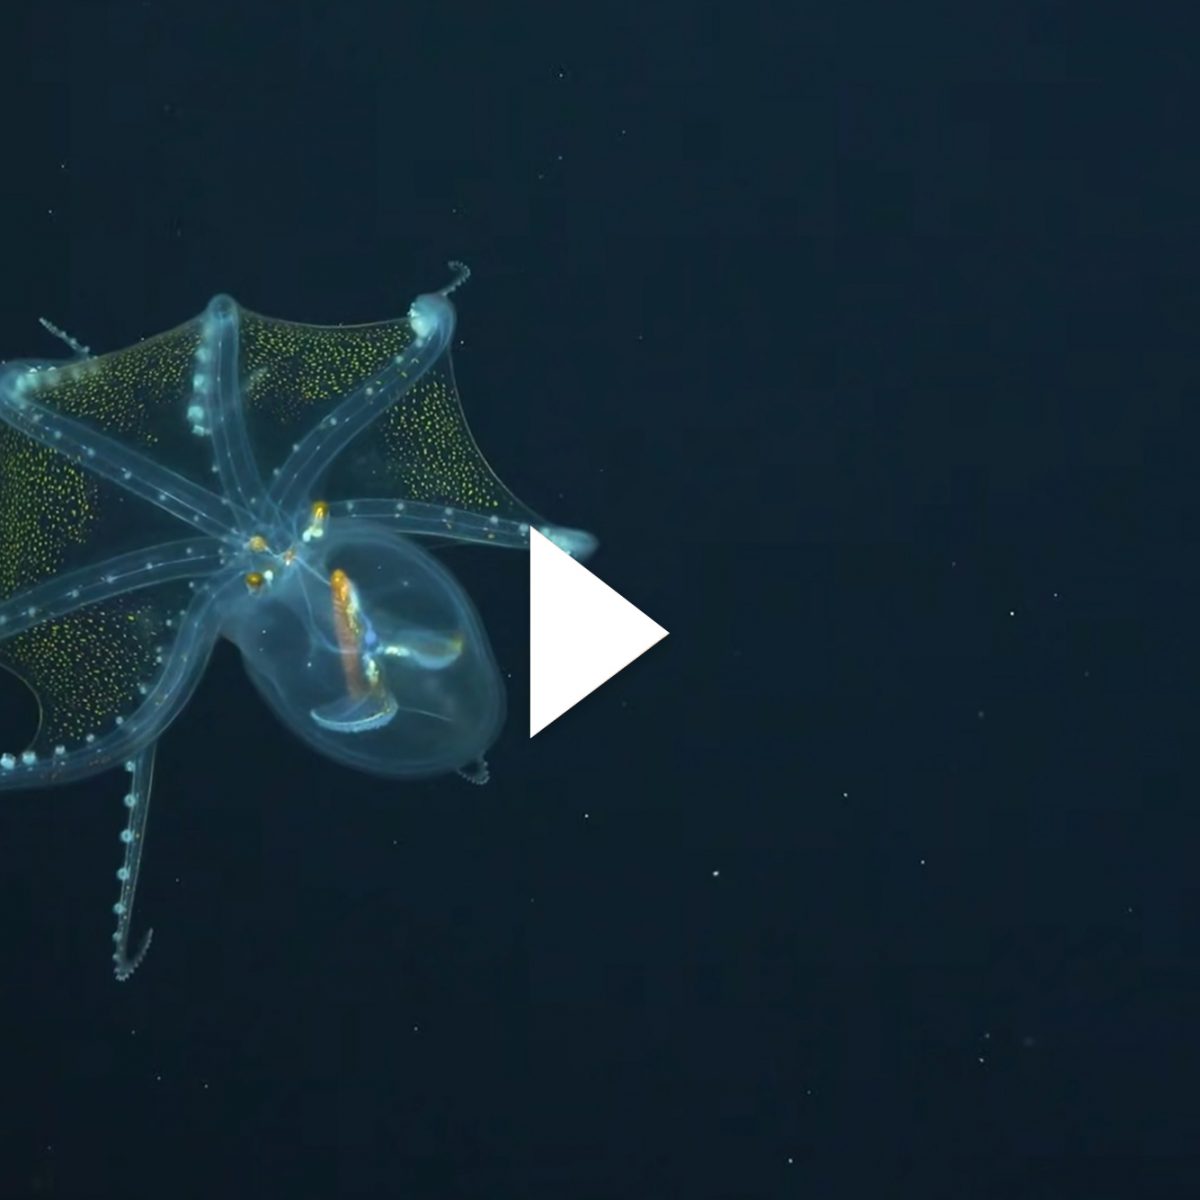 There's More to the Story behind Rare Glass Octopus Footage | The ...